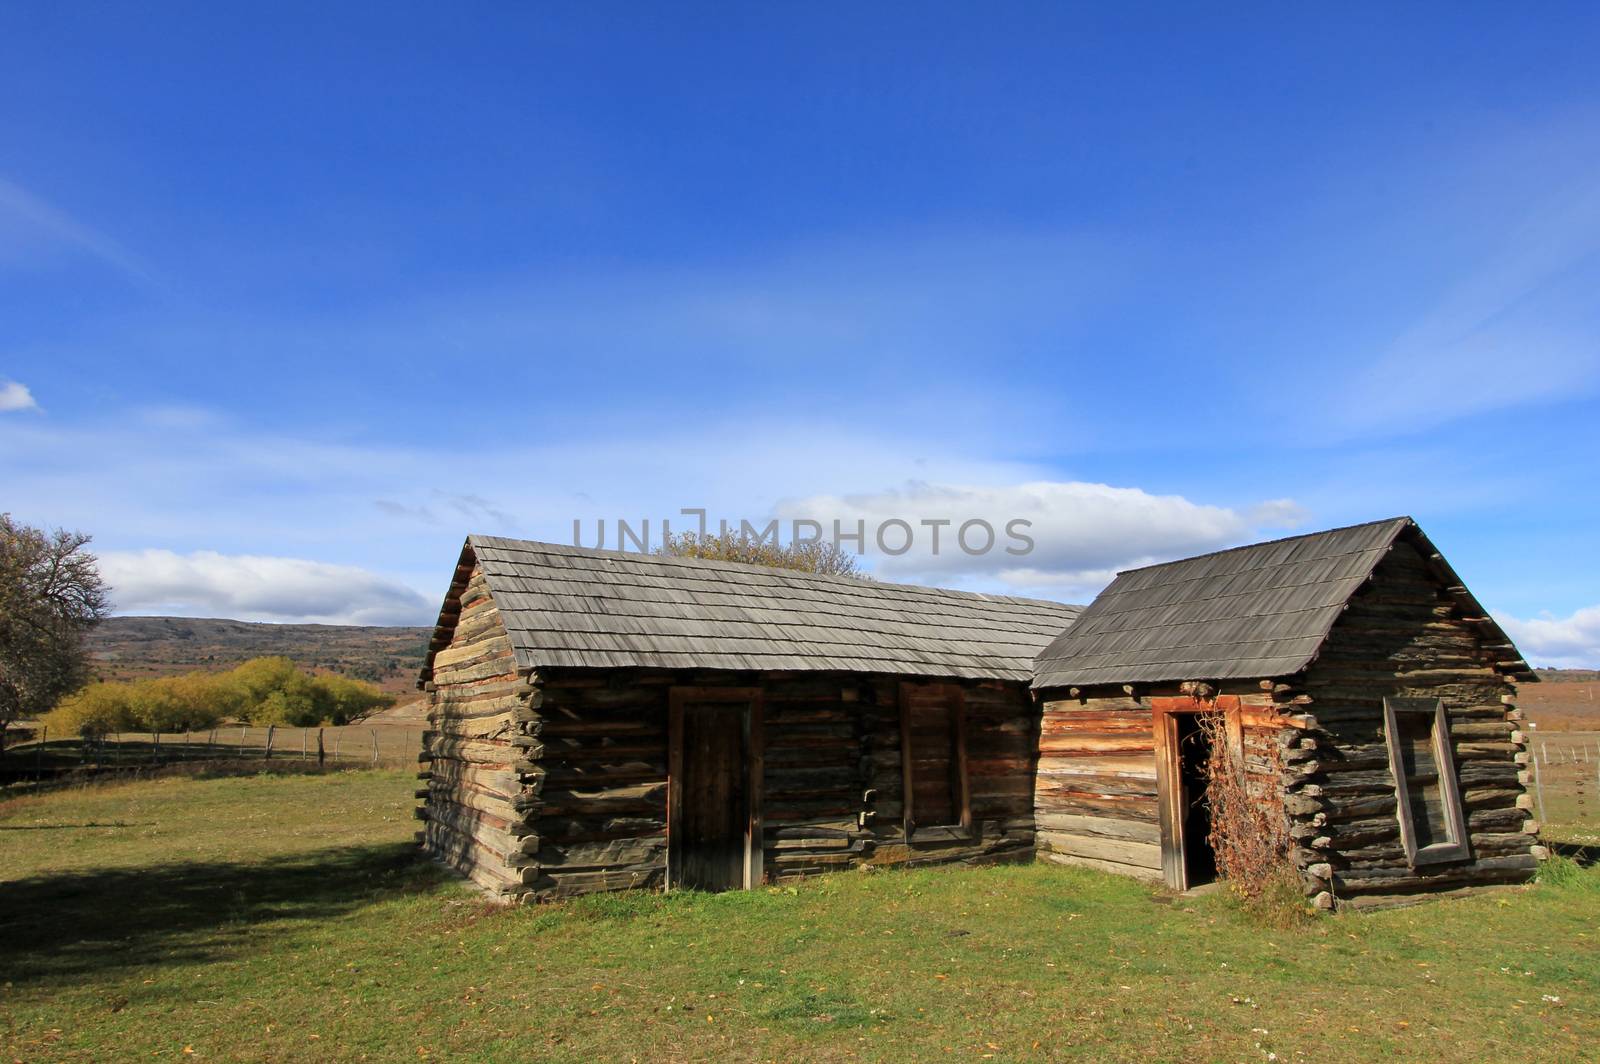 Butch Cassidy and Sundance Kid House by cicloco